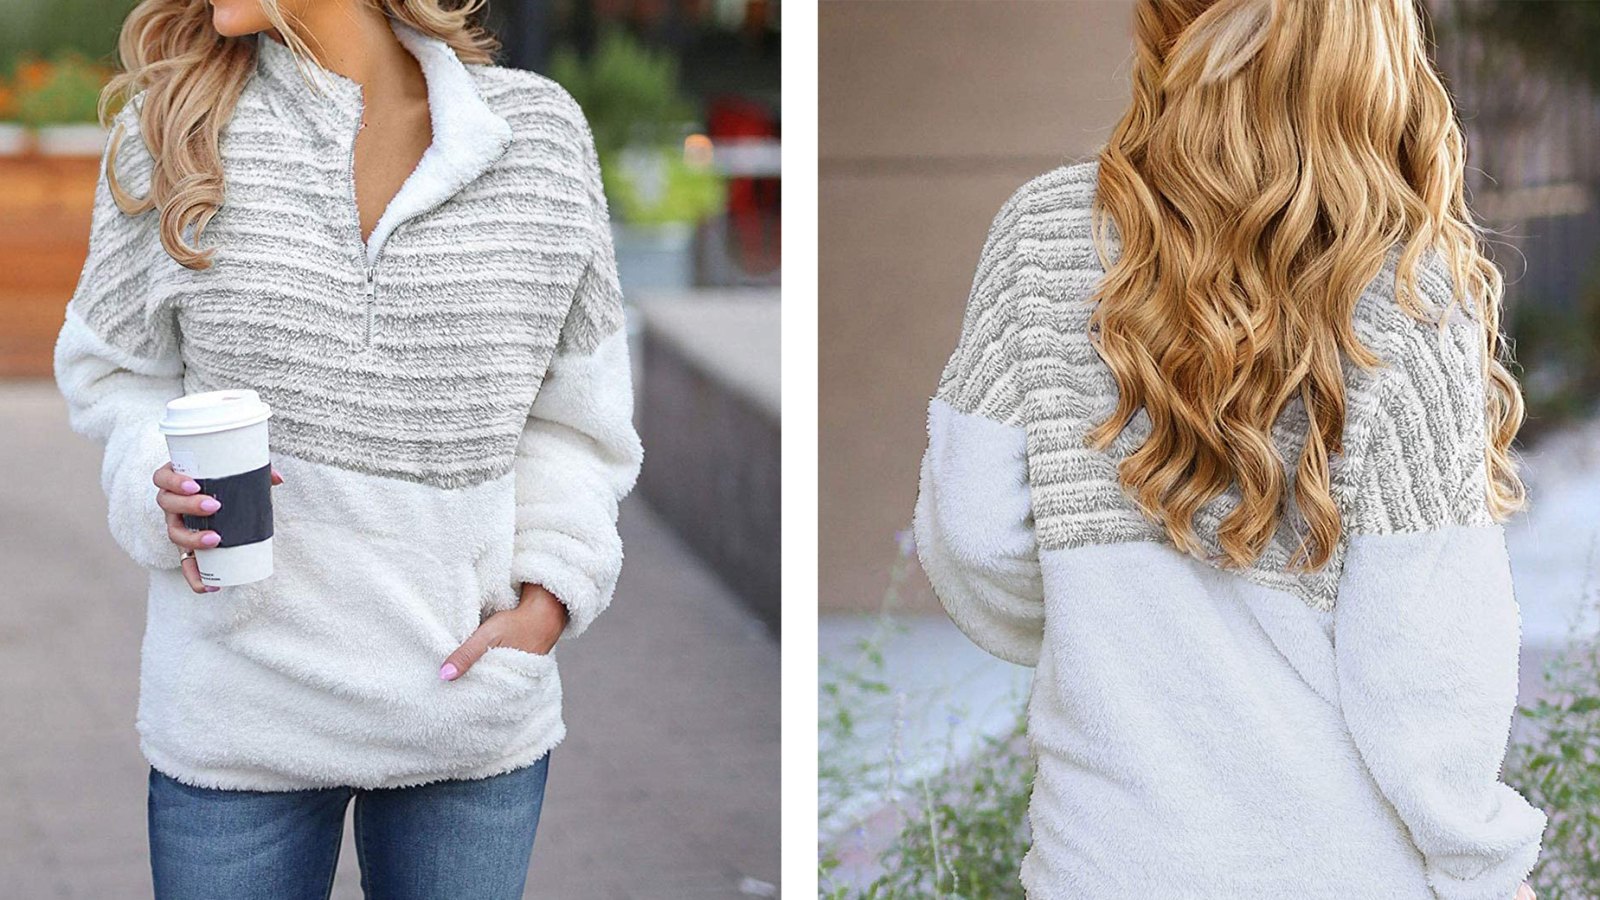 PRETTYGARDEN Sweatshirt Is a Fast Way to a Cute Look in the Cold